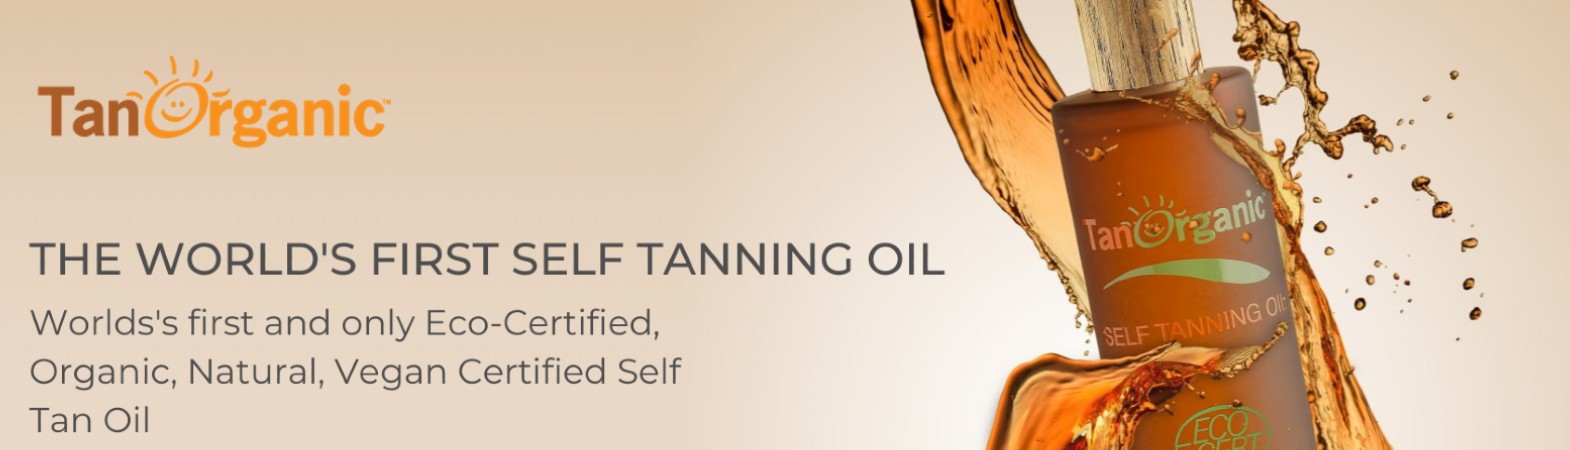 TanOrganic - Self Tanning Products